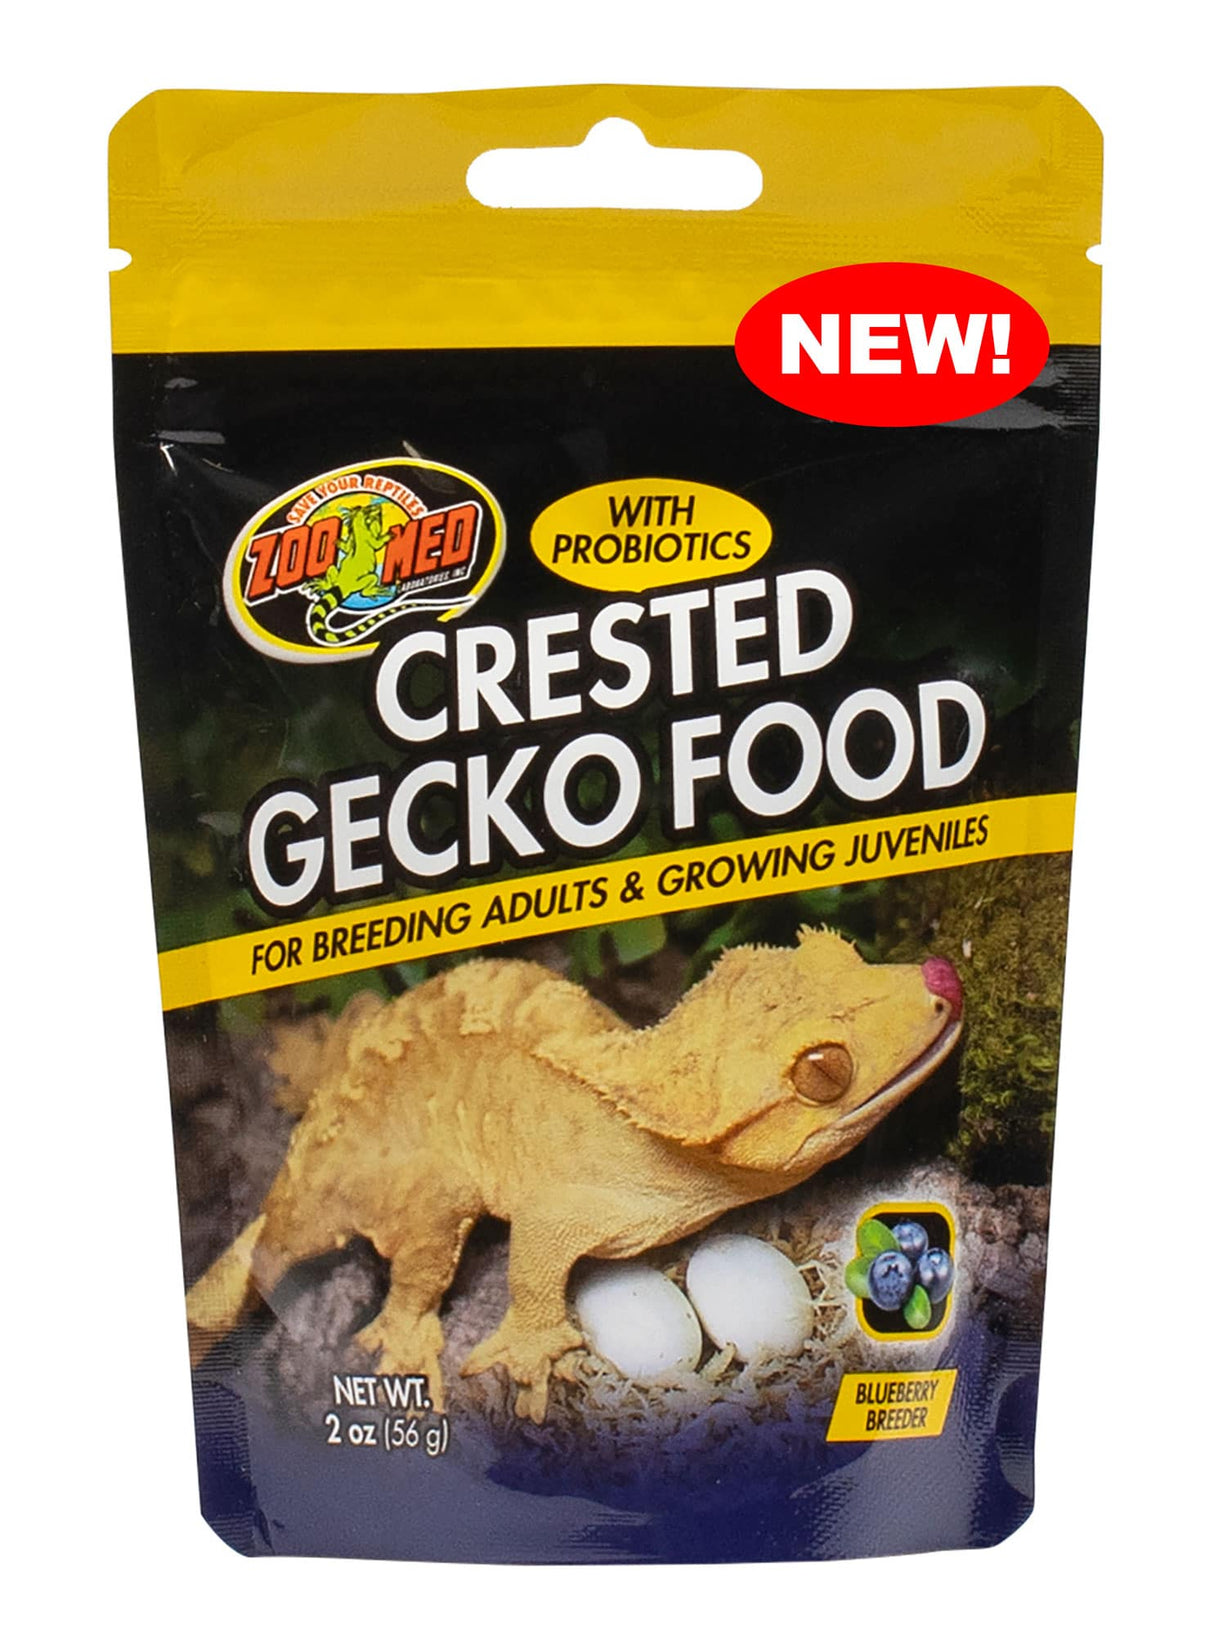 2 oz Zoo Med Crested Gecko Food with Probiotics For Breeding Adults and Growing Juveniles Blueberry Flavor